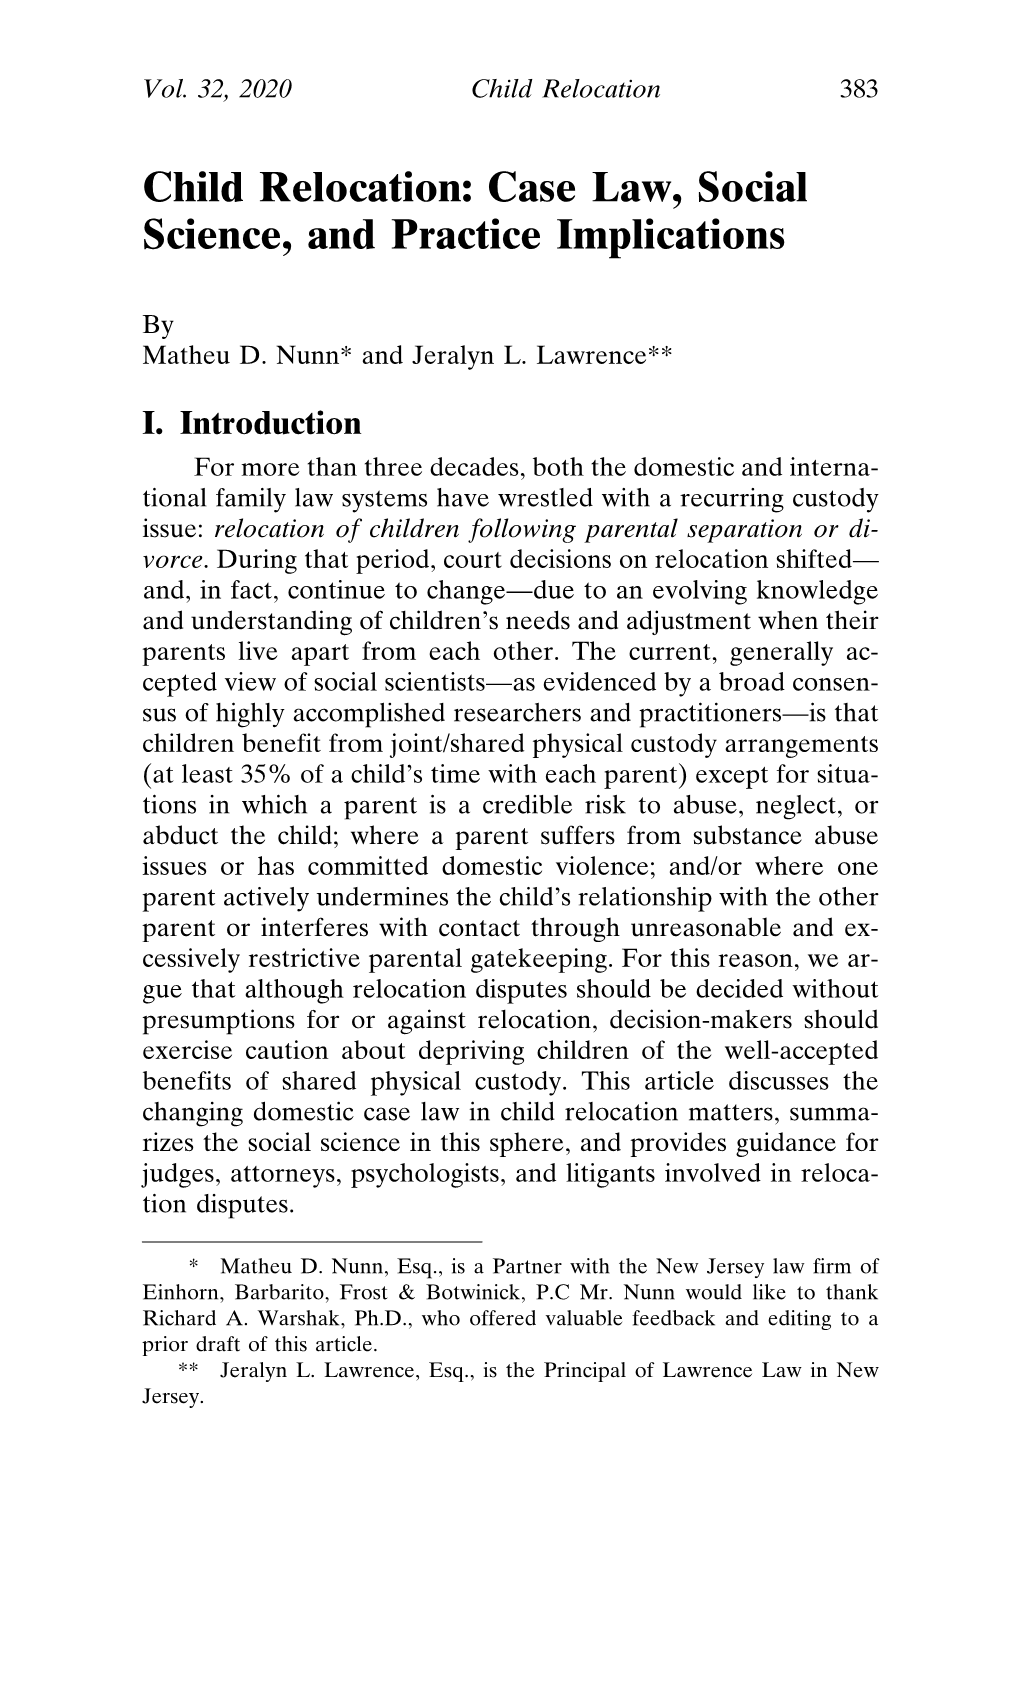 Child Relocation: Case Law, Social Science, and Practice Implications